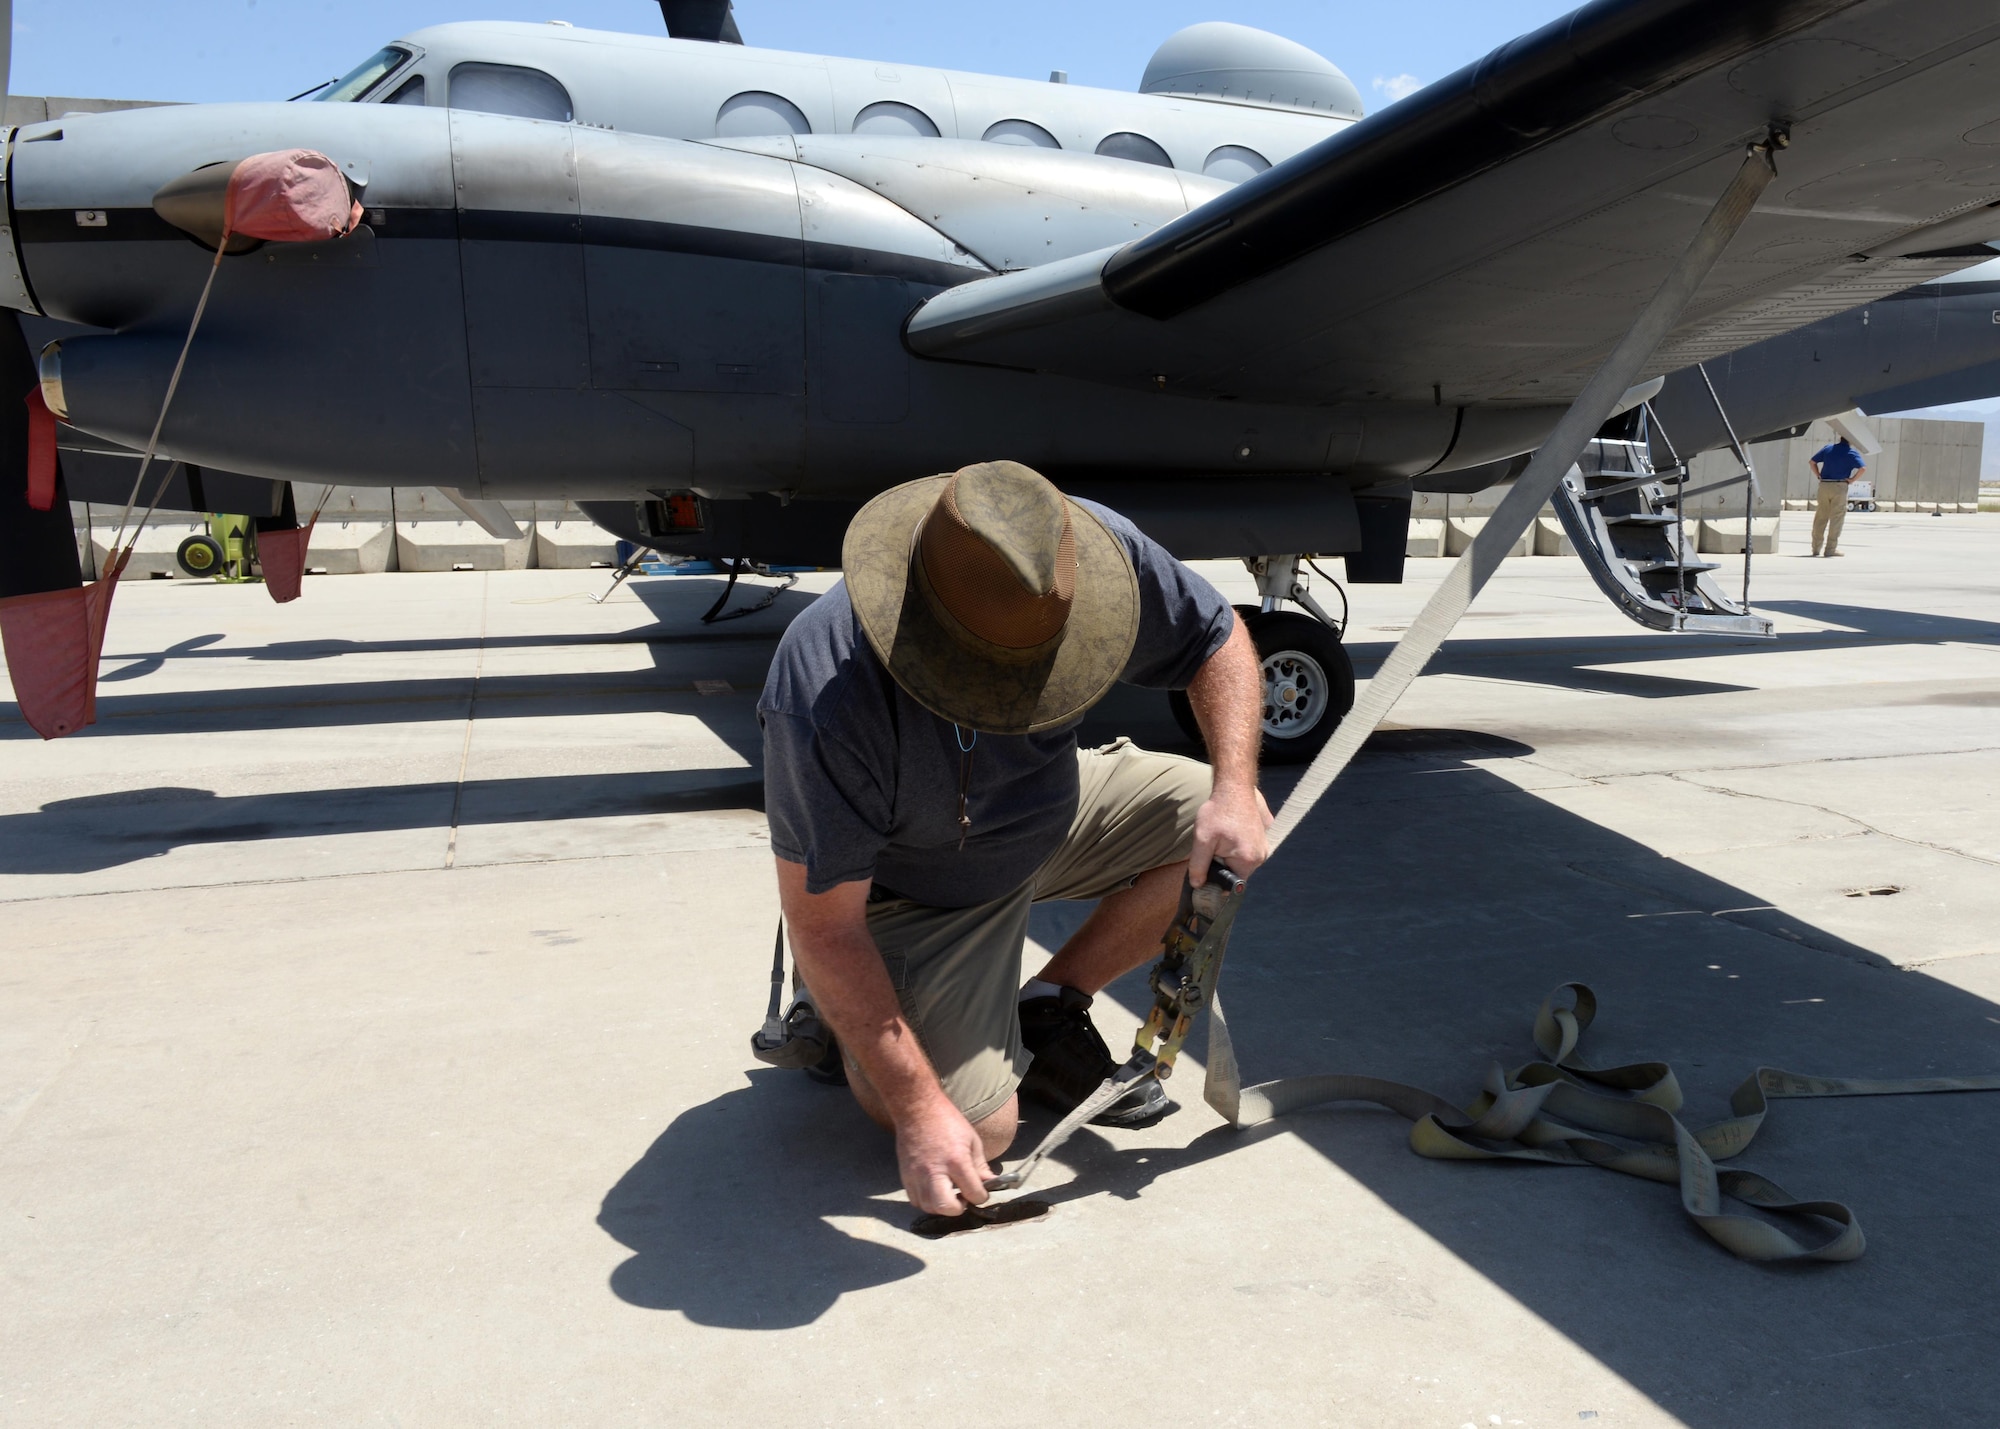 Shawn Hall, 455th Expeditionary Aircraft Maintenance Squadron aircraft mechanic, straps down an MC-12W aircraft due to high winds June 26, 2015, at Bagram Airfield, Afghanistan. Hall is part of the Project Liberty team that is deployed here in support of NATO’s Resolute Support mission. (U.S. Air Force photo by Senior Airman Cierra Presentado/Released)